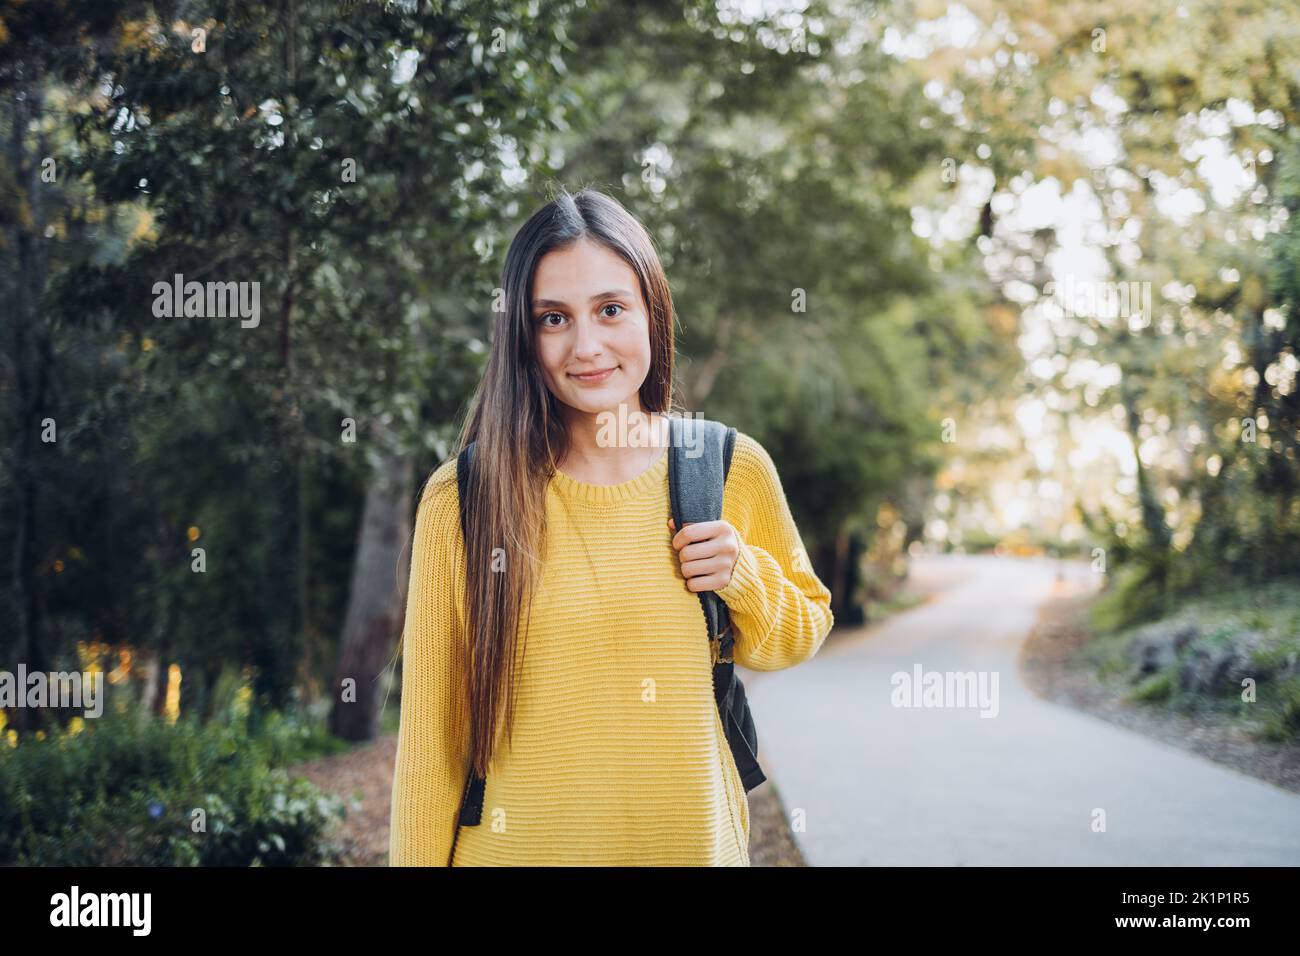 Smiling female college student wearing a yellow sweater and a backpack in the campus park road. Innocent smile Stock Photo